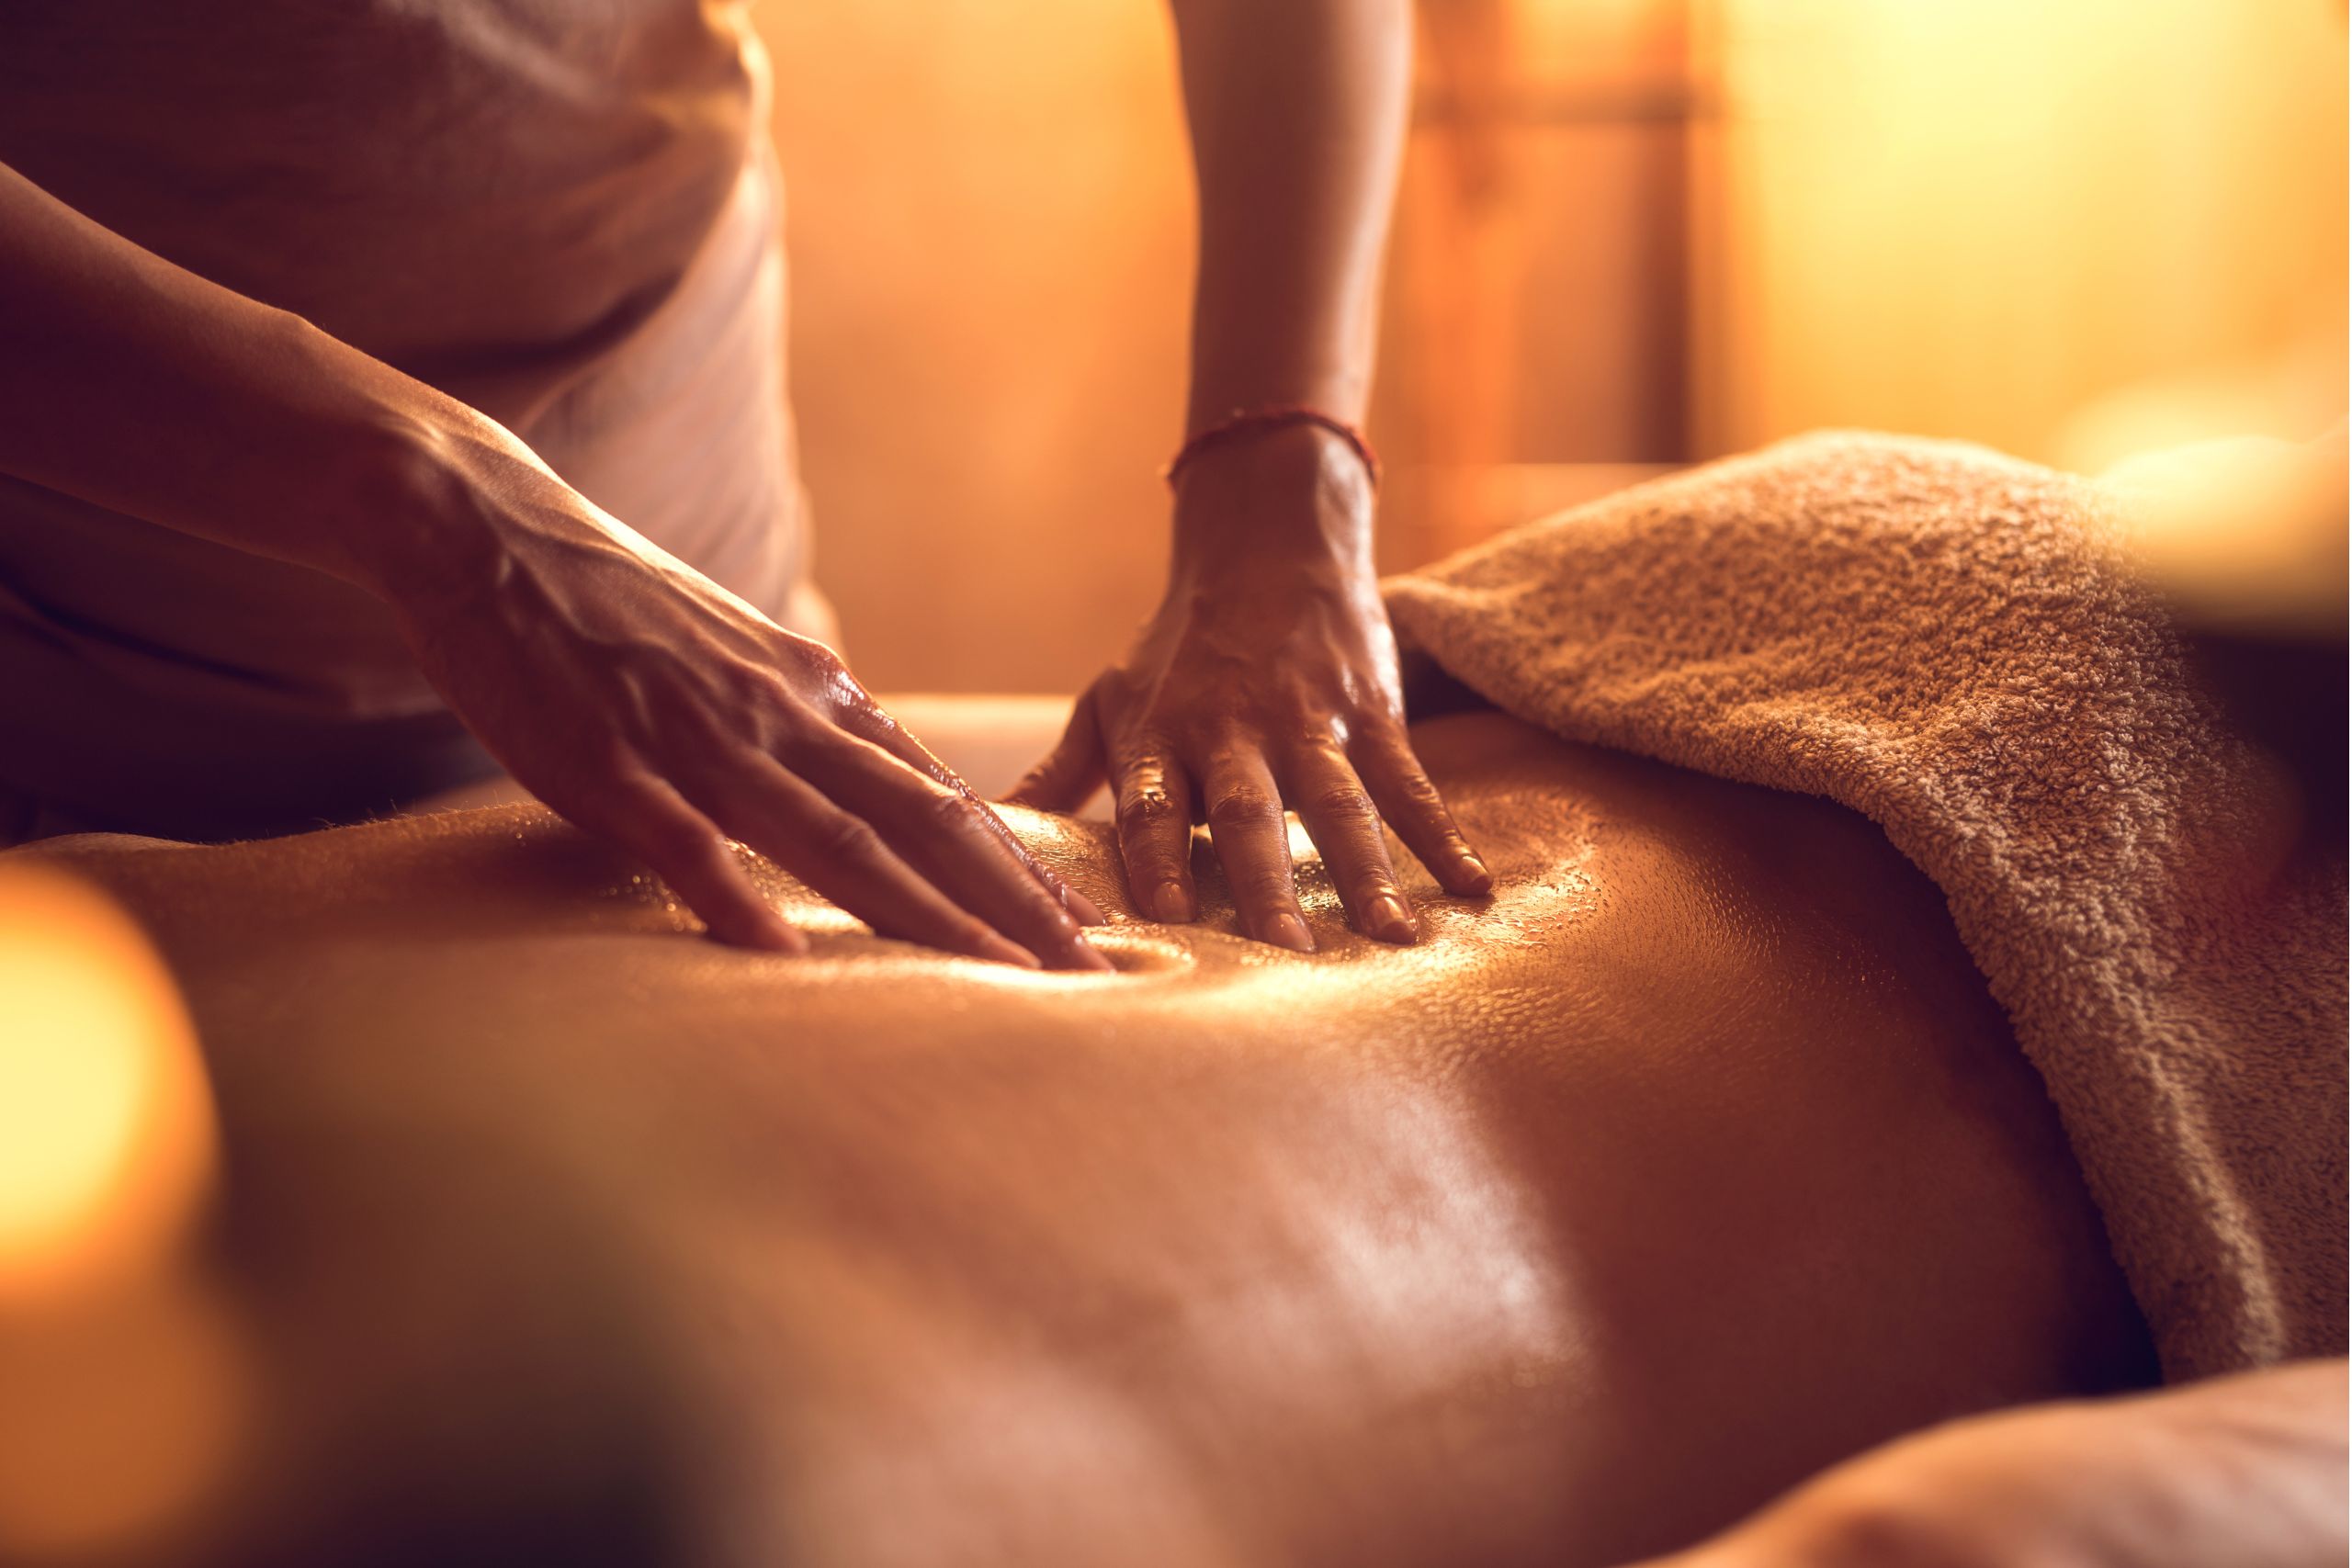 Erotic Massages in Fuengirola: Where to Go and What to Expect